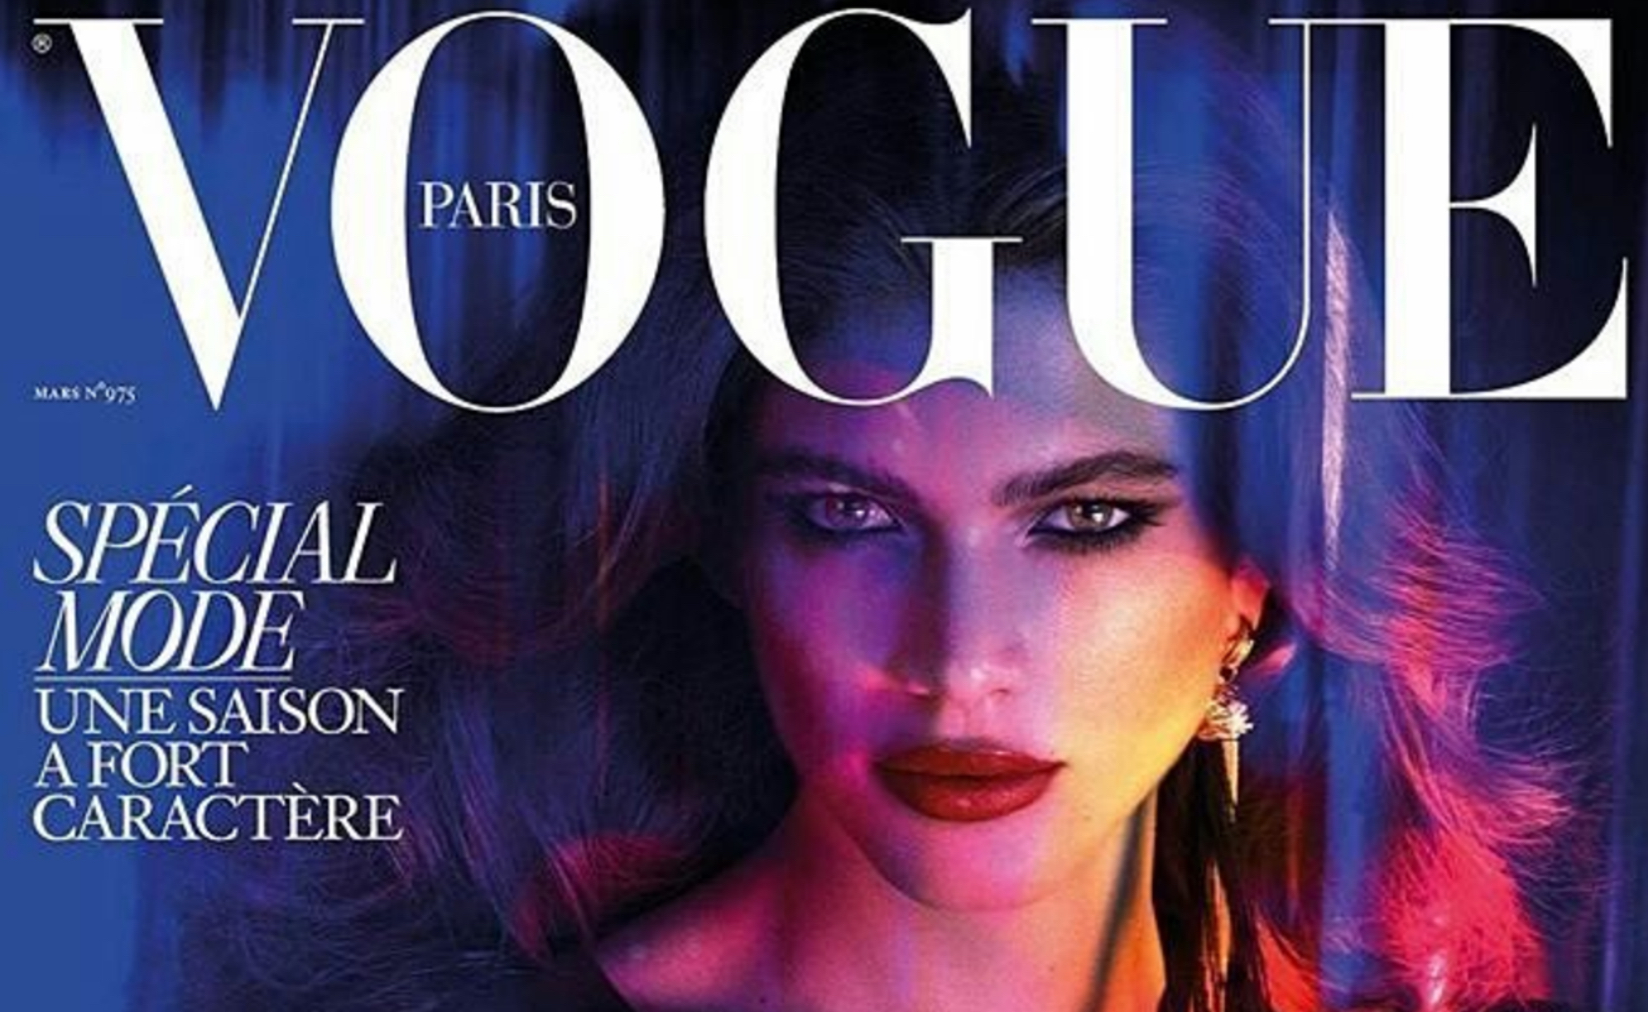 French Vogue features trans model on its cover for the first time